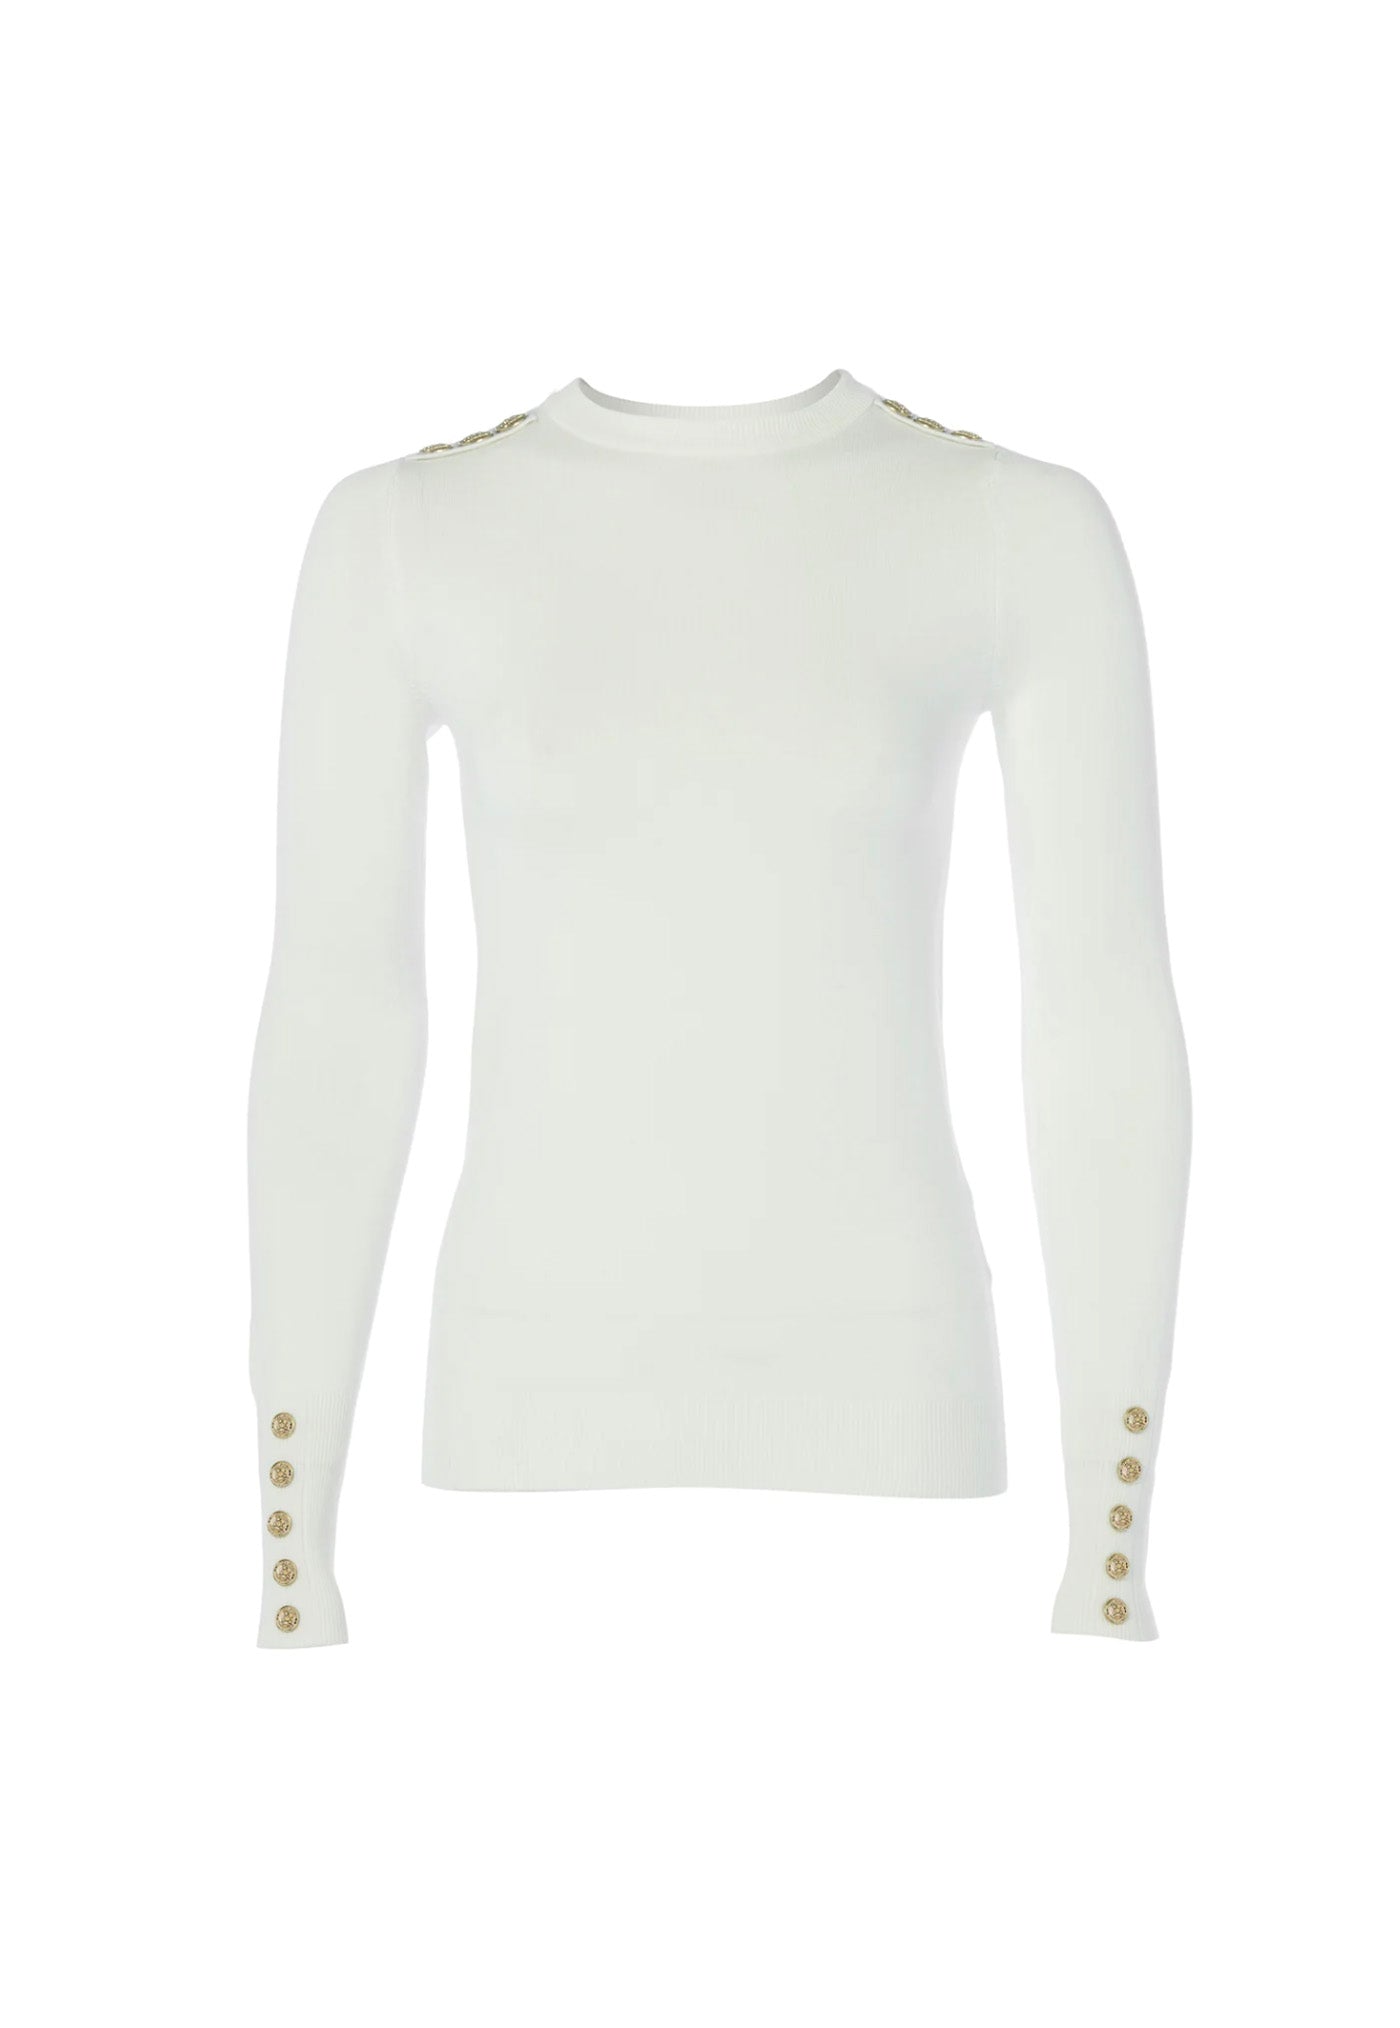 Buttoned Knit Crew Neck - Cream sold by Angel Divine